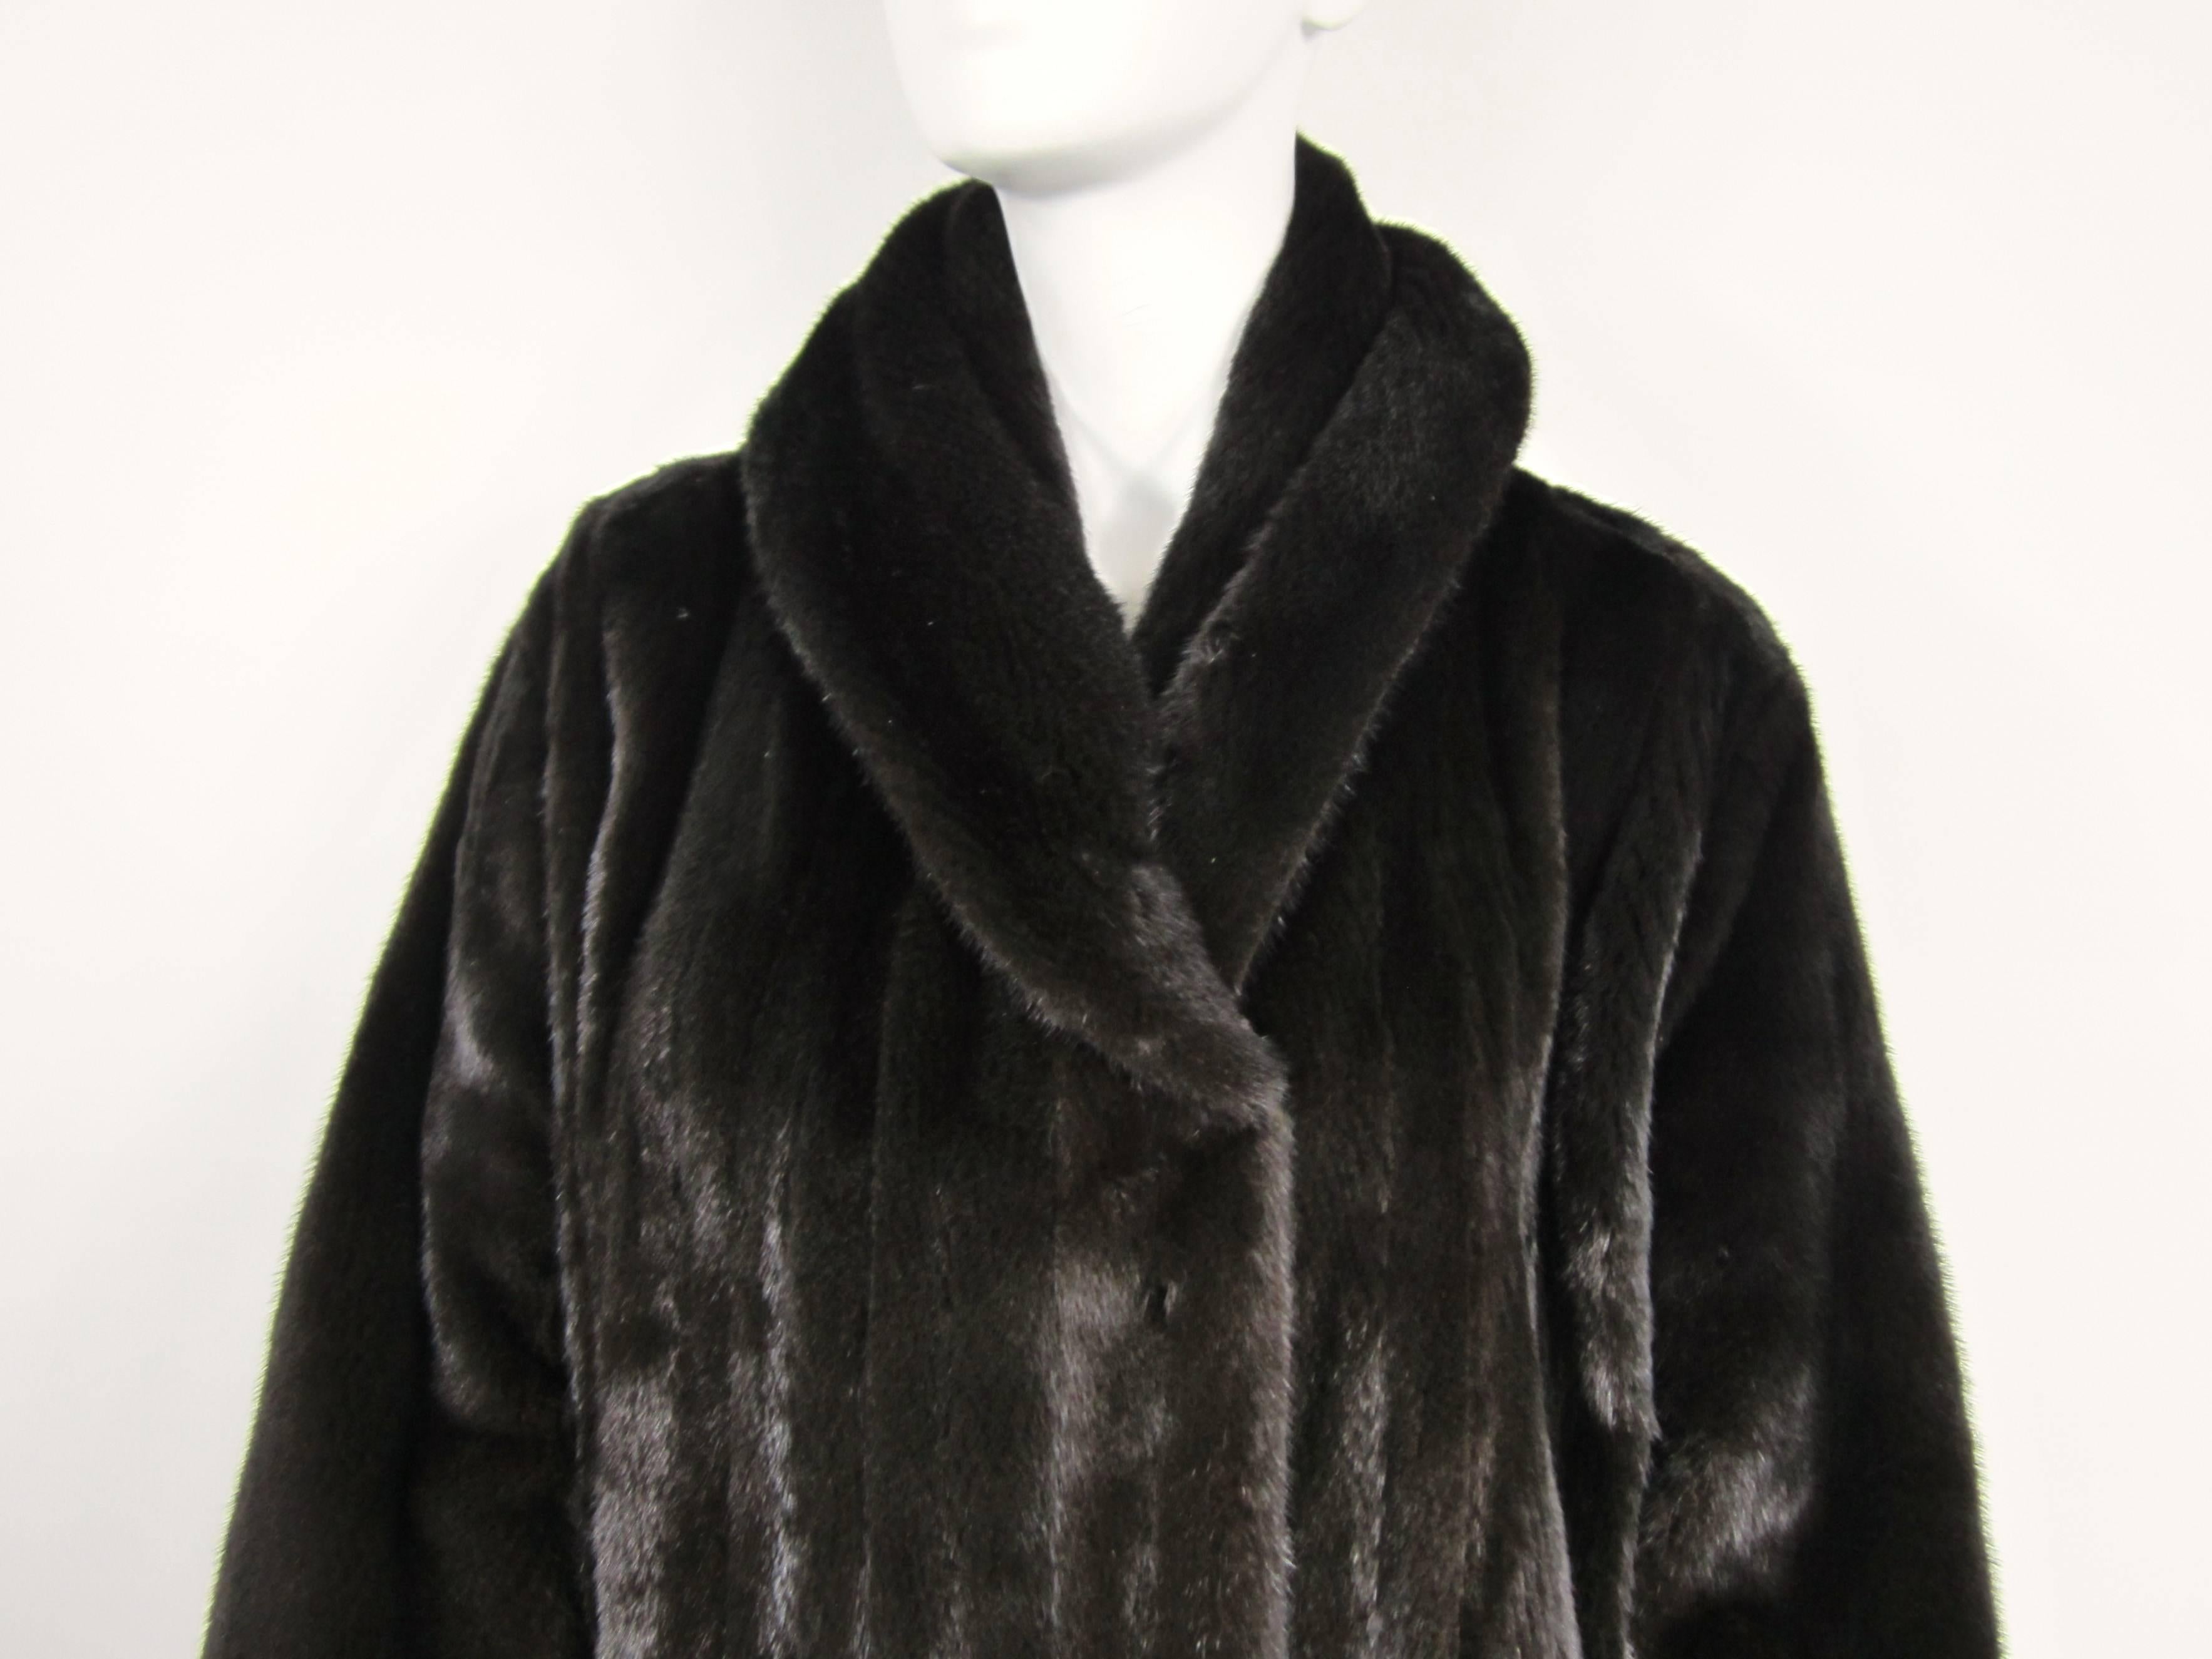 Stunning Michael Kors Ranch Mink, velvet lined slit pockets with a Large collar. 2 pockets. Mink is Soft and supple Mink Retails New $15,000.00 Measuring approximately 48 in Bust, 48 in Waist, 48.5 inches long, 9.5 in collar unfolded. Will fit a